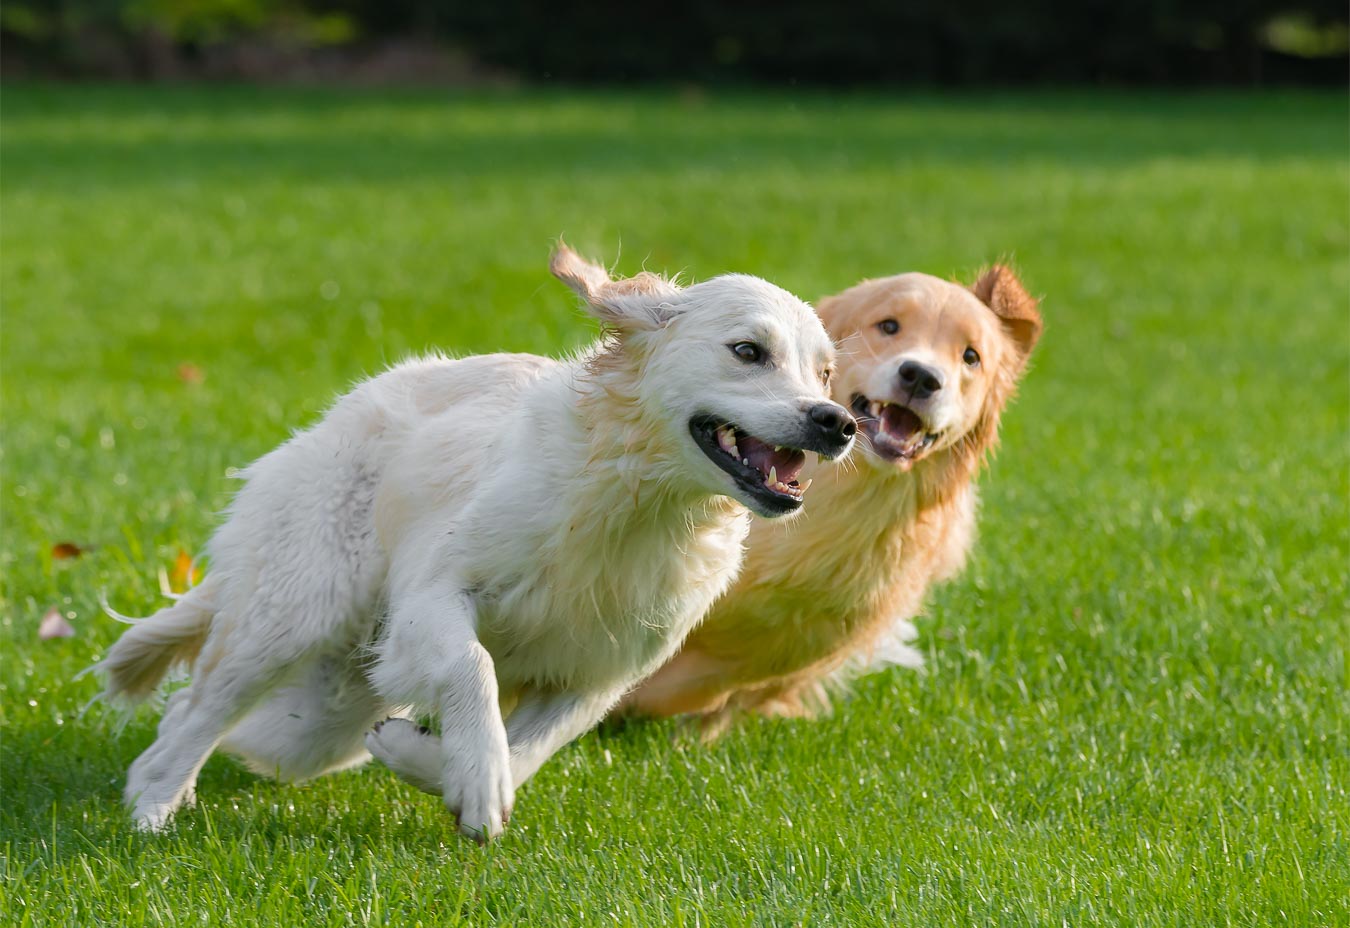 Two Golden Retrievers leaning in while running